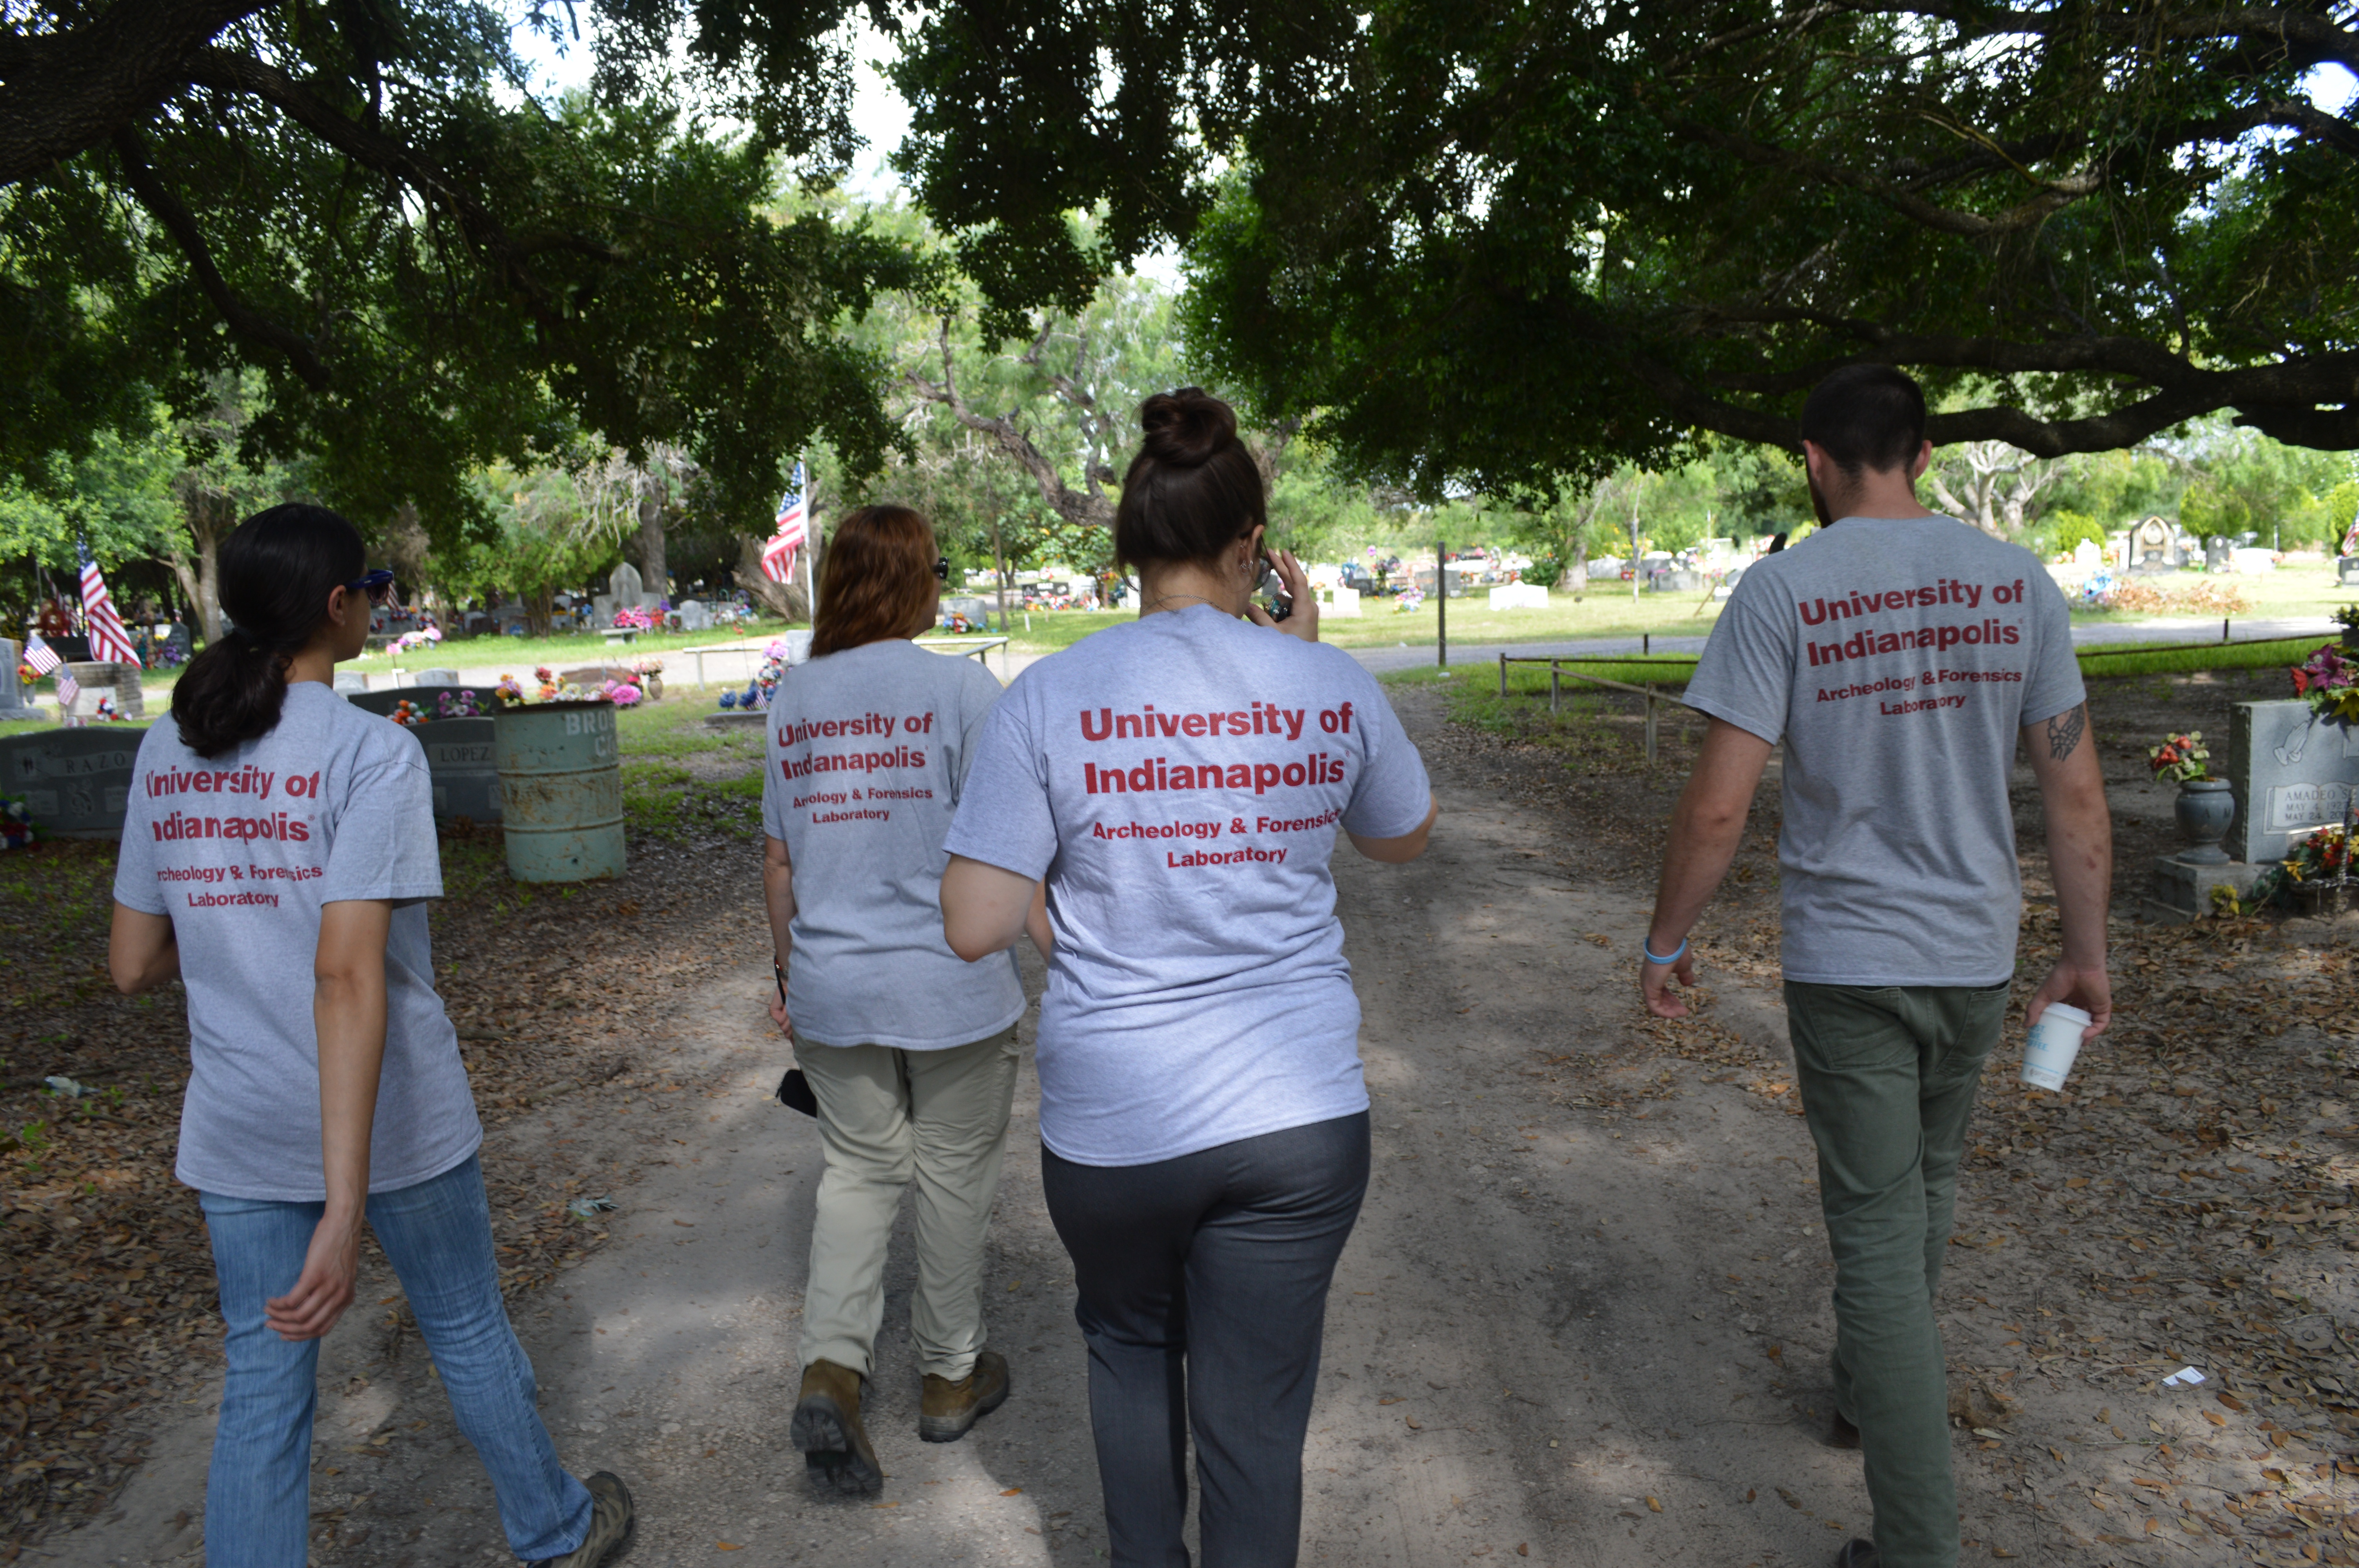 Beyond Borders team members walking through the cemetery with all UIndy Archaeology and Forensic Lab shirts on display